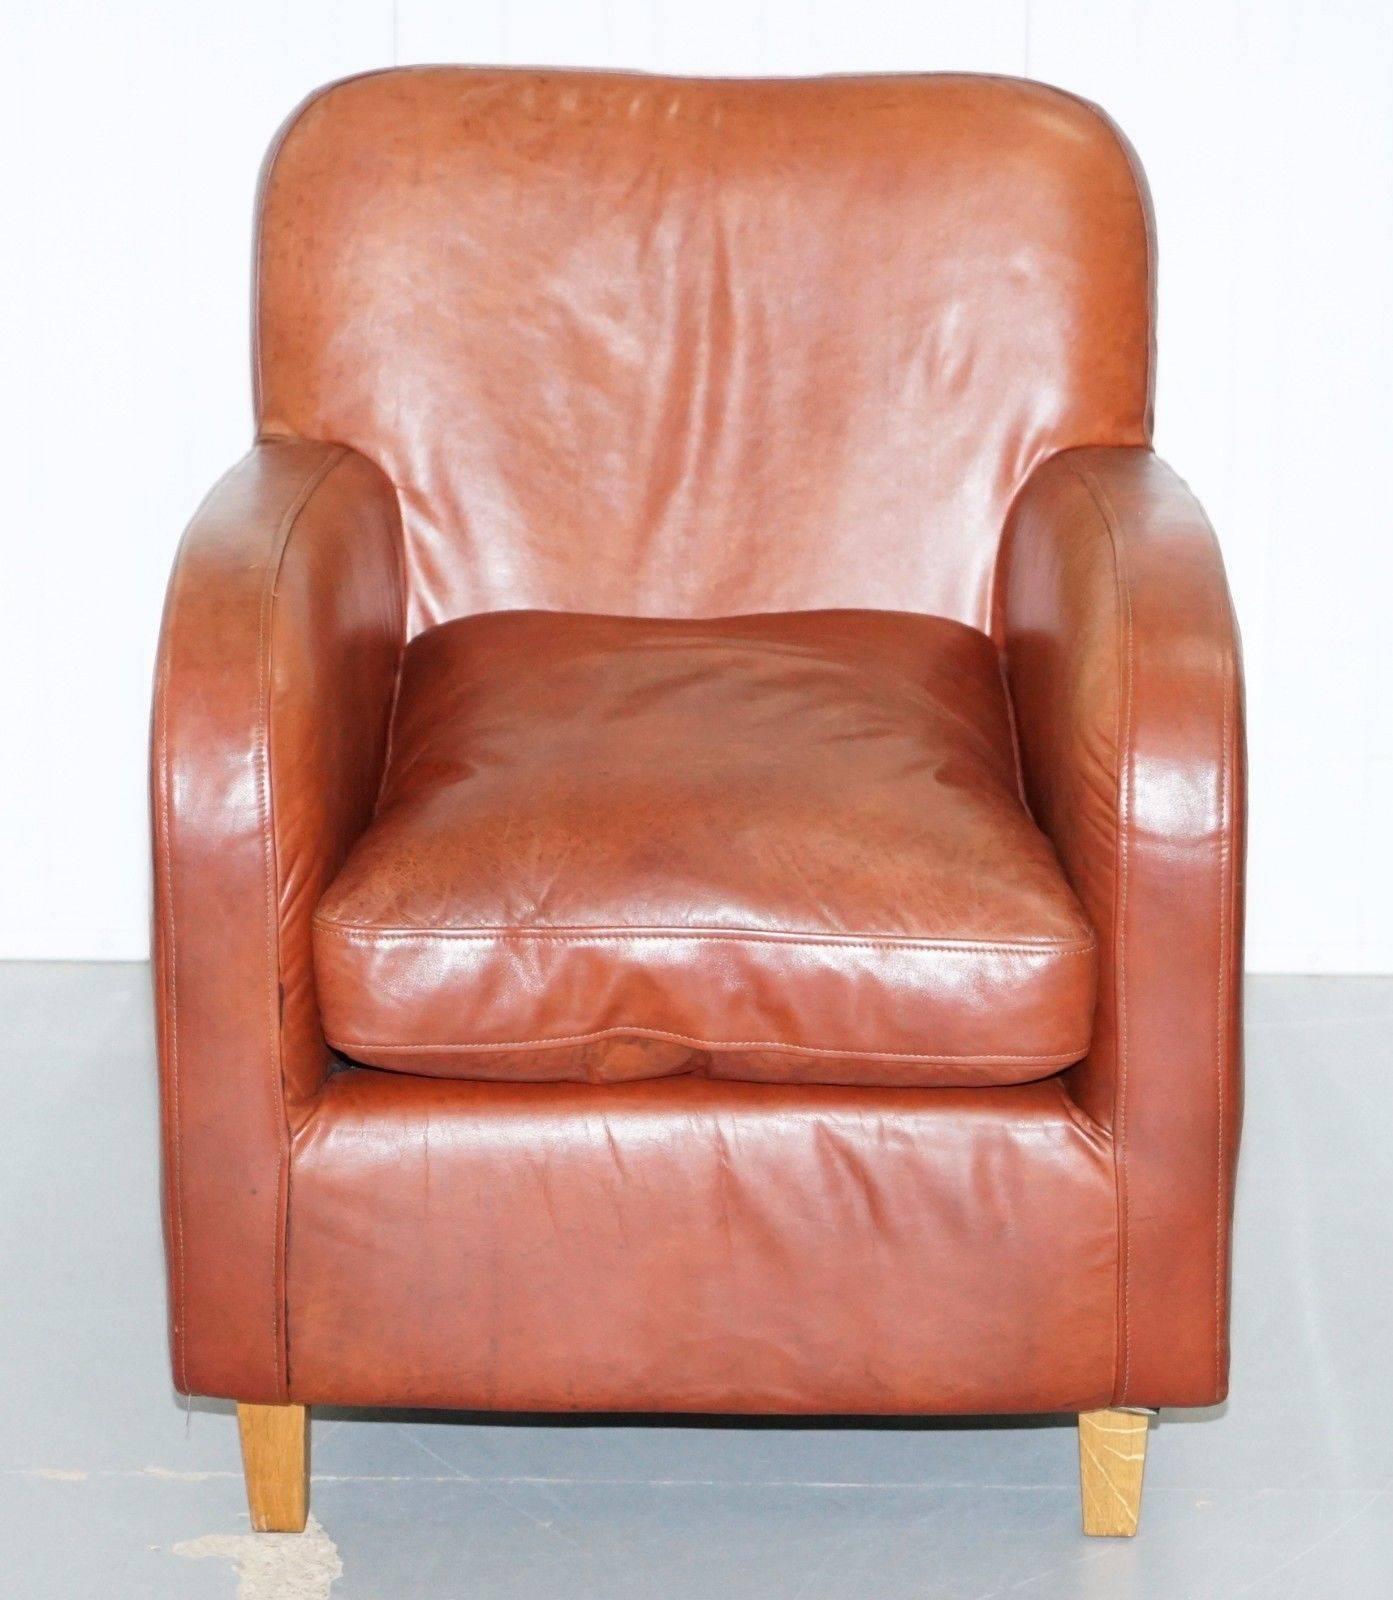 We are delighted to offer for sale this lovely Habitat Havana cigar brown leather gentleman’s club armchair with thick heavy feather filled cushion RRP £1399

A very good looking and exceptionally comfortable club armchair, the leather is soft and